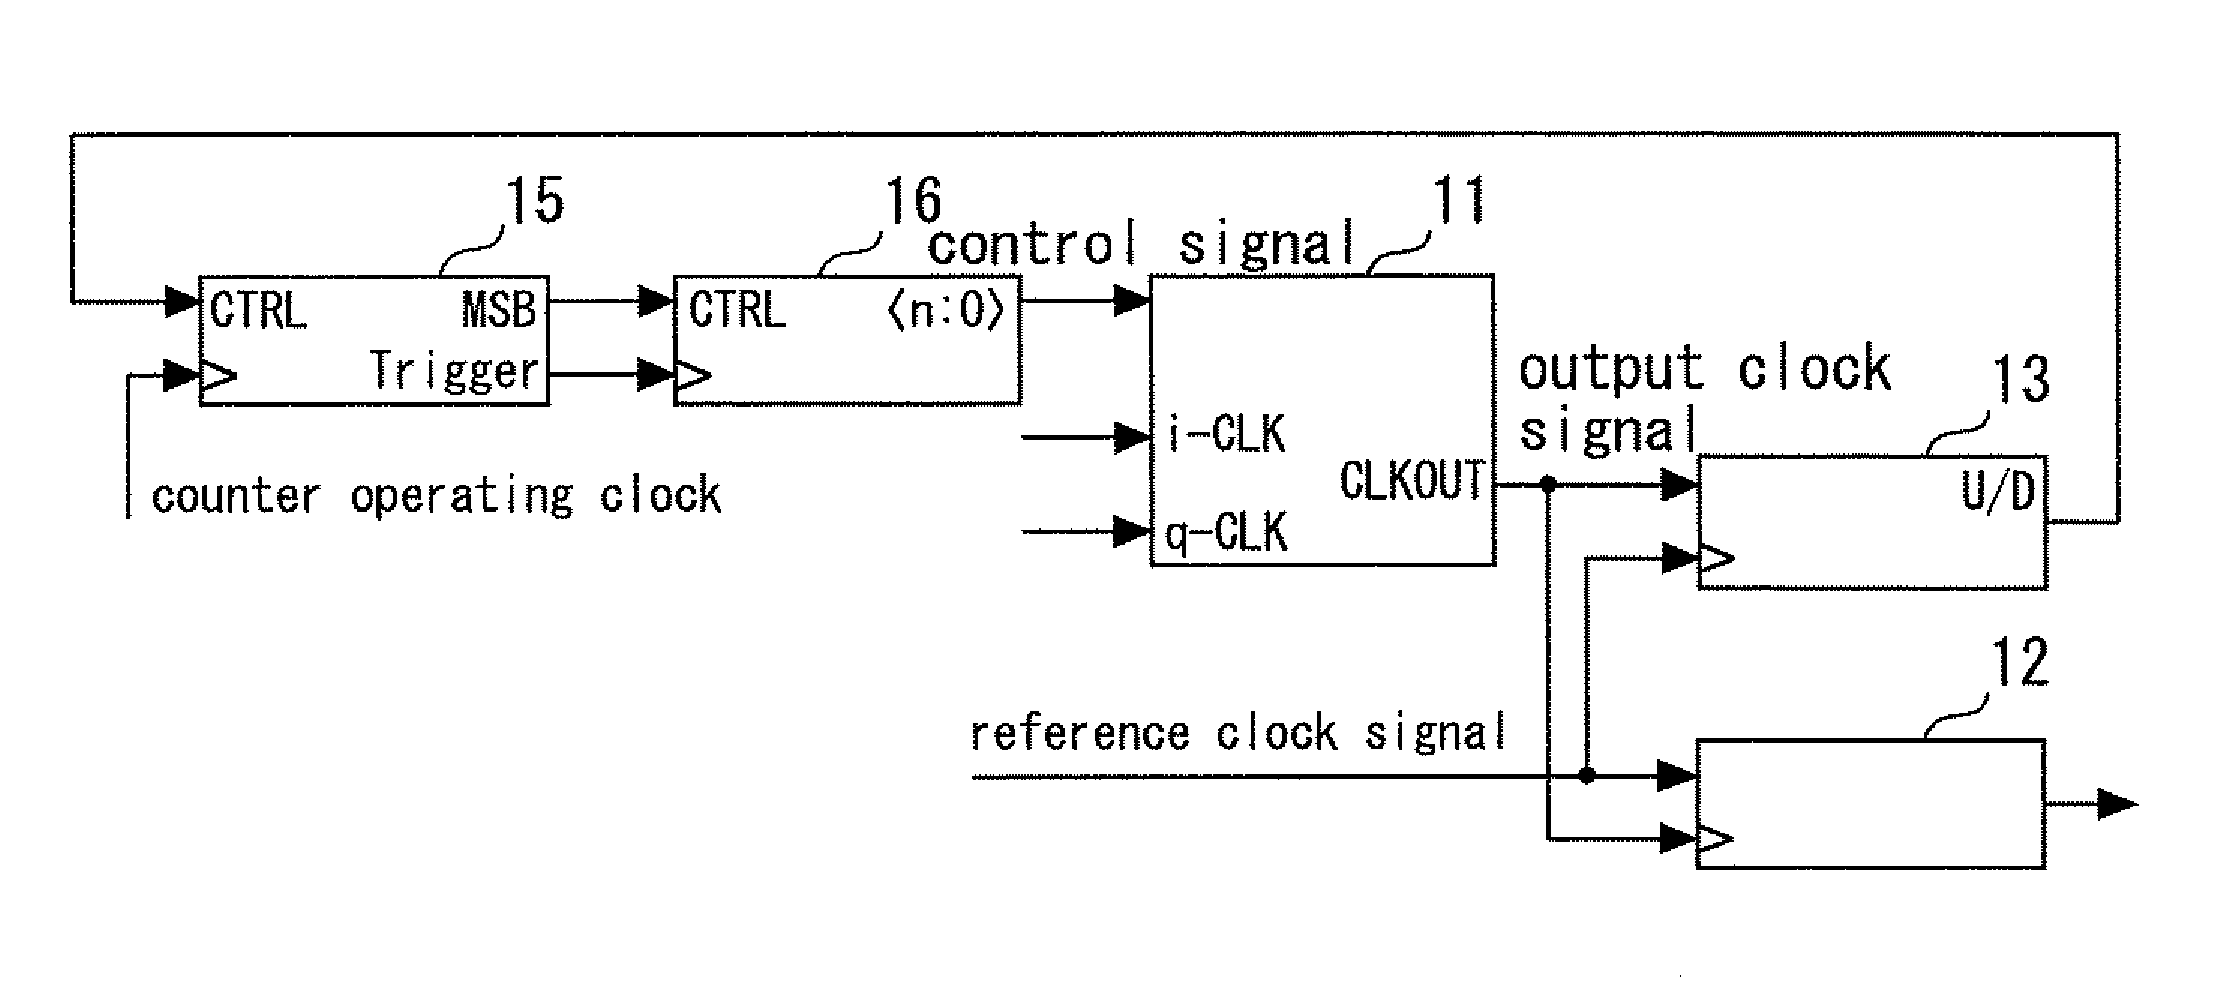 Digital-control-type phase-composing circuit system